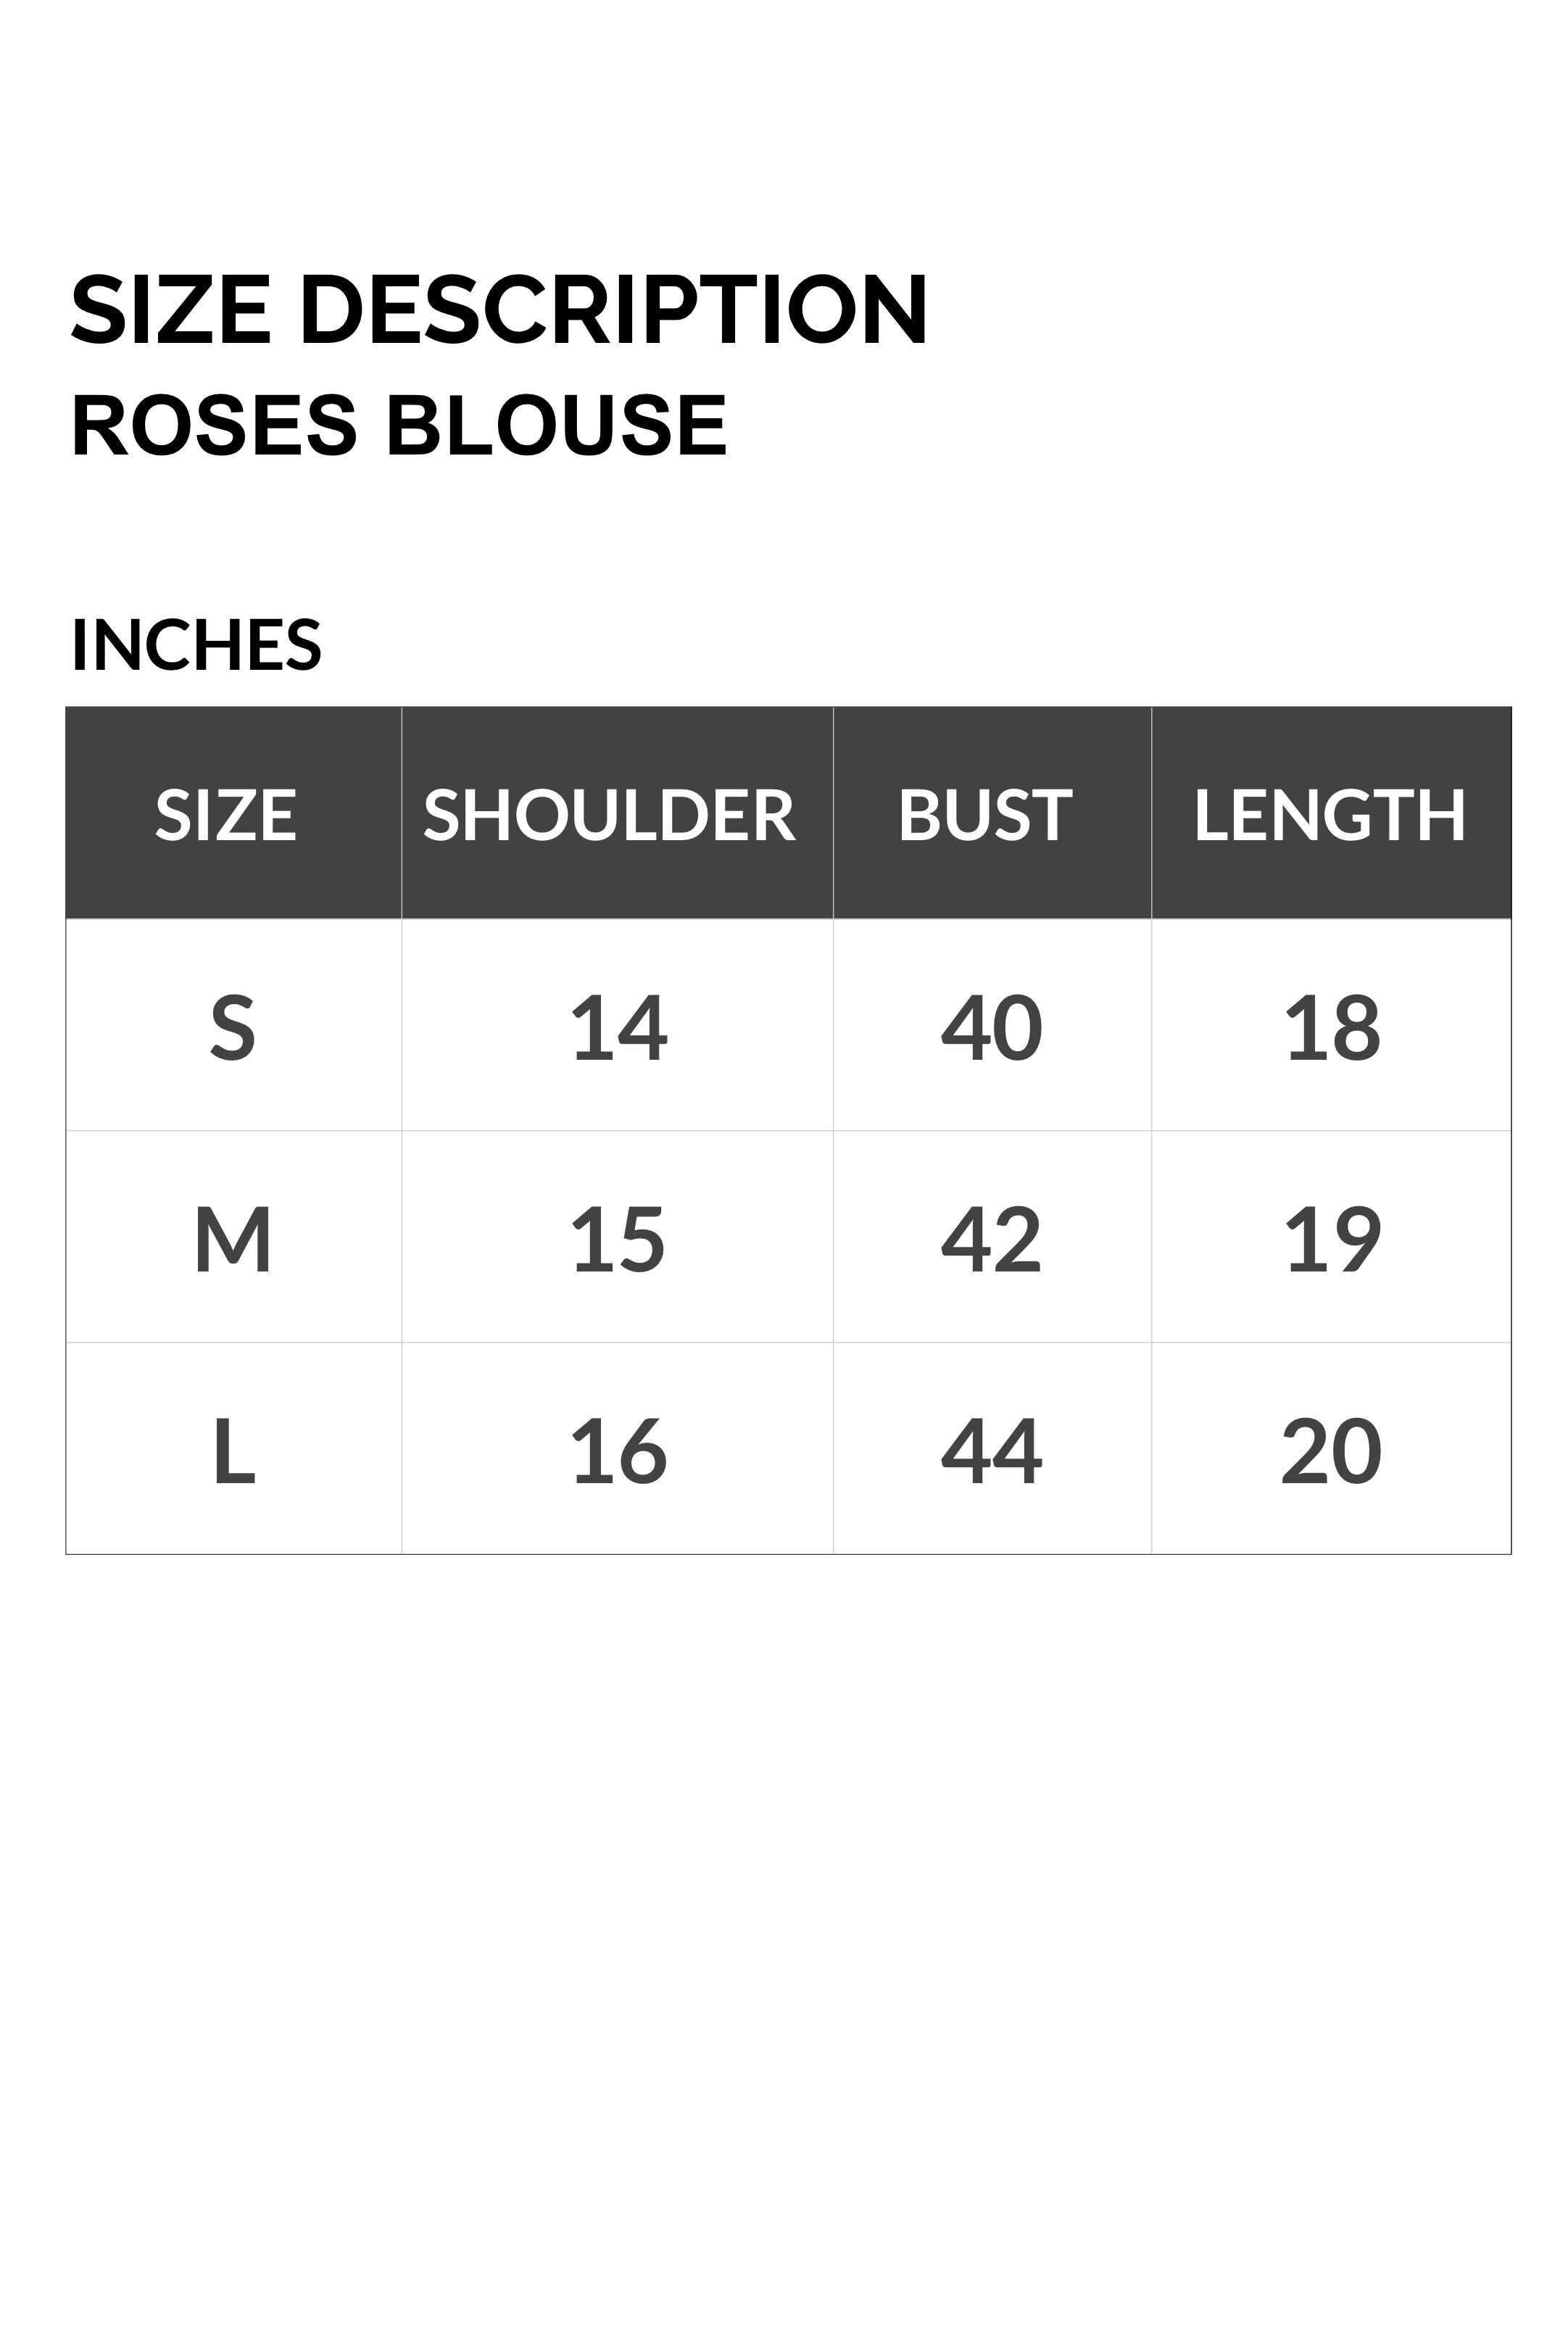 SIZE ROSES BLOUSE